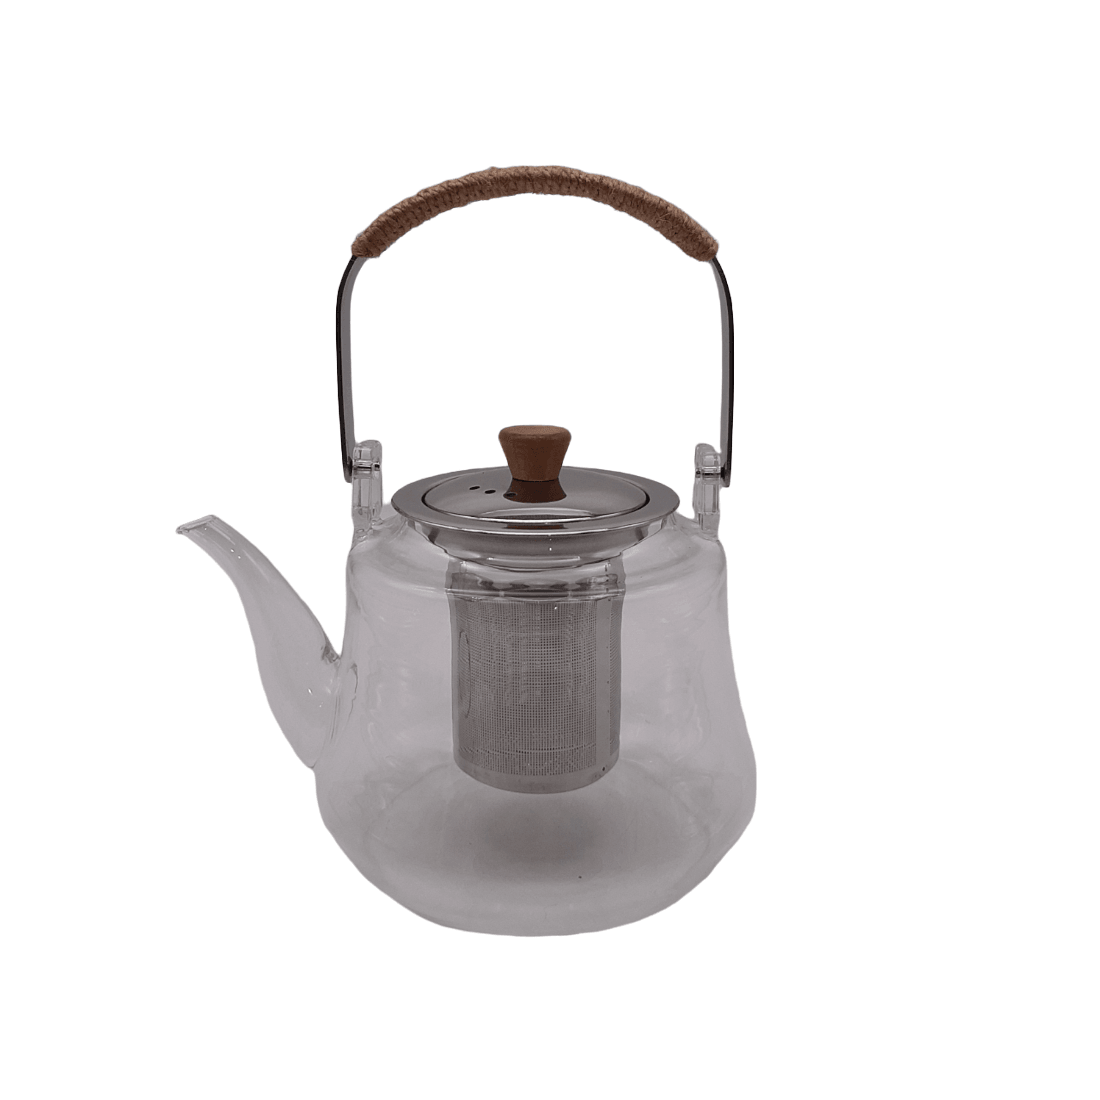 Heat-Resistant Curved Glass Teapot with Infuser - Home And Trends